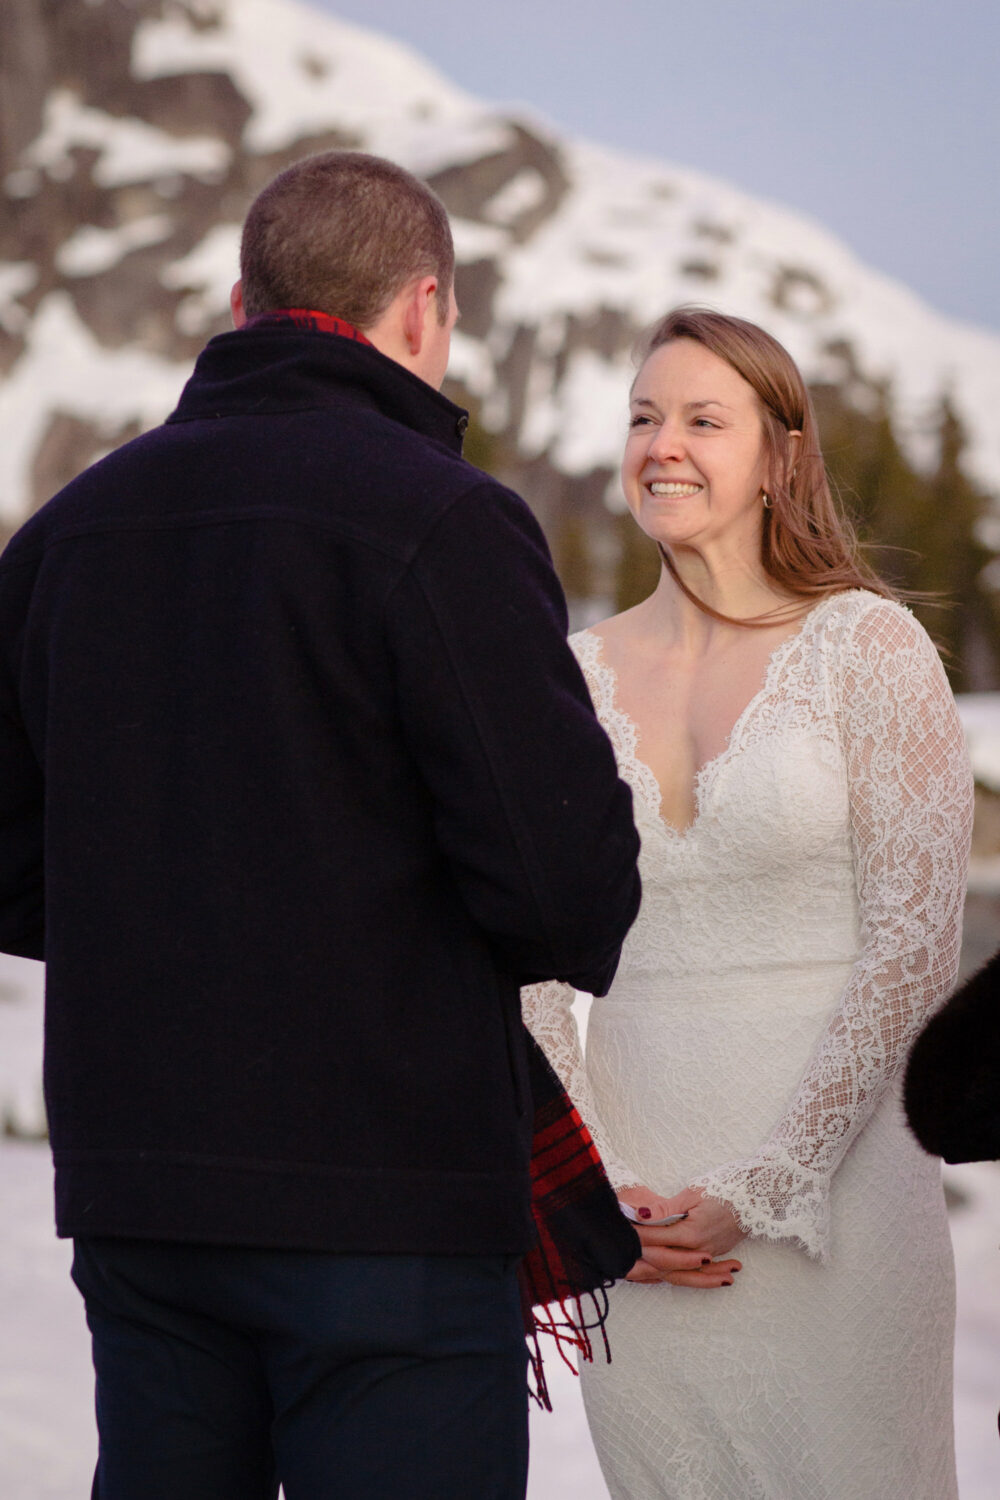 A bride smiling joyfully, shot by a Tahoe photographer good at capturing candid moments.